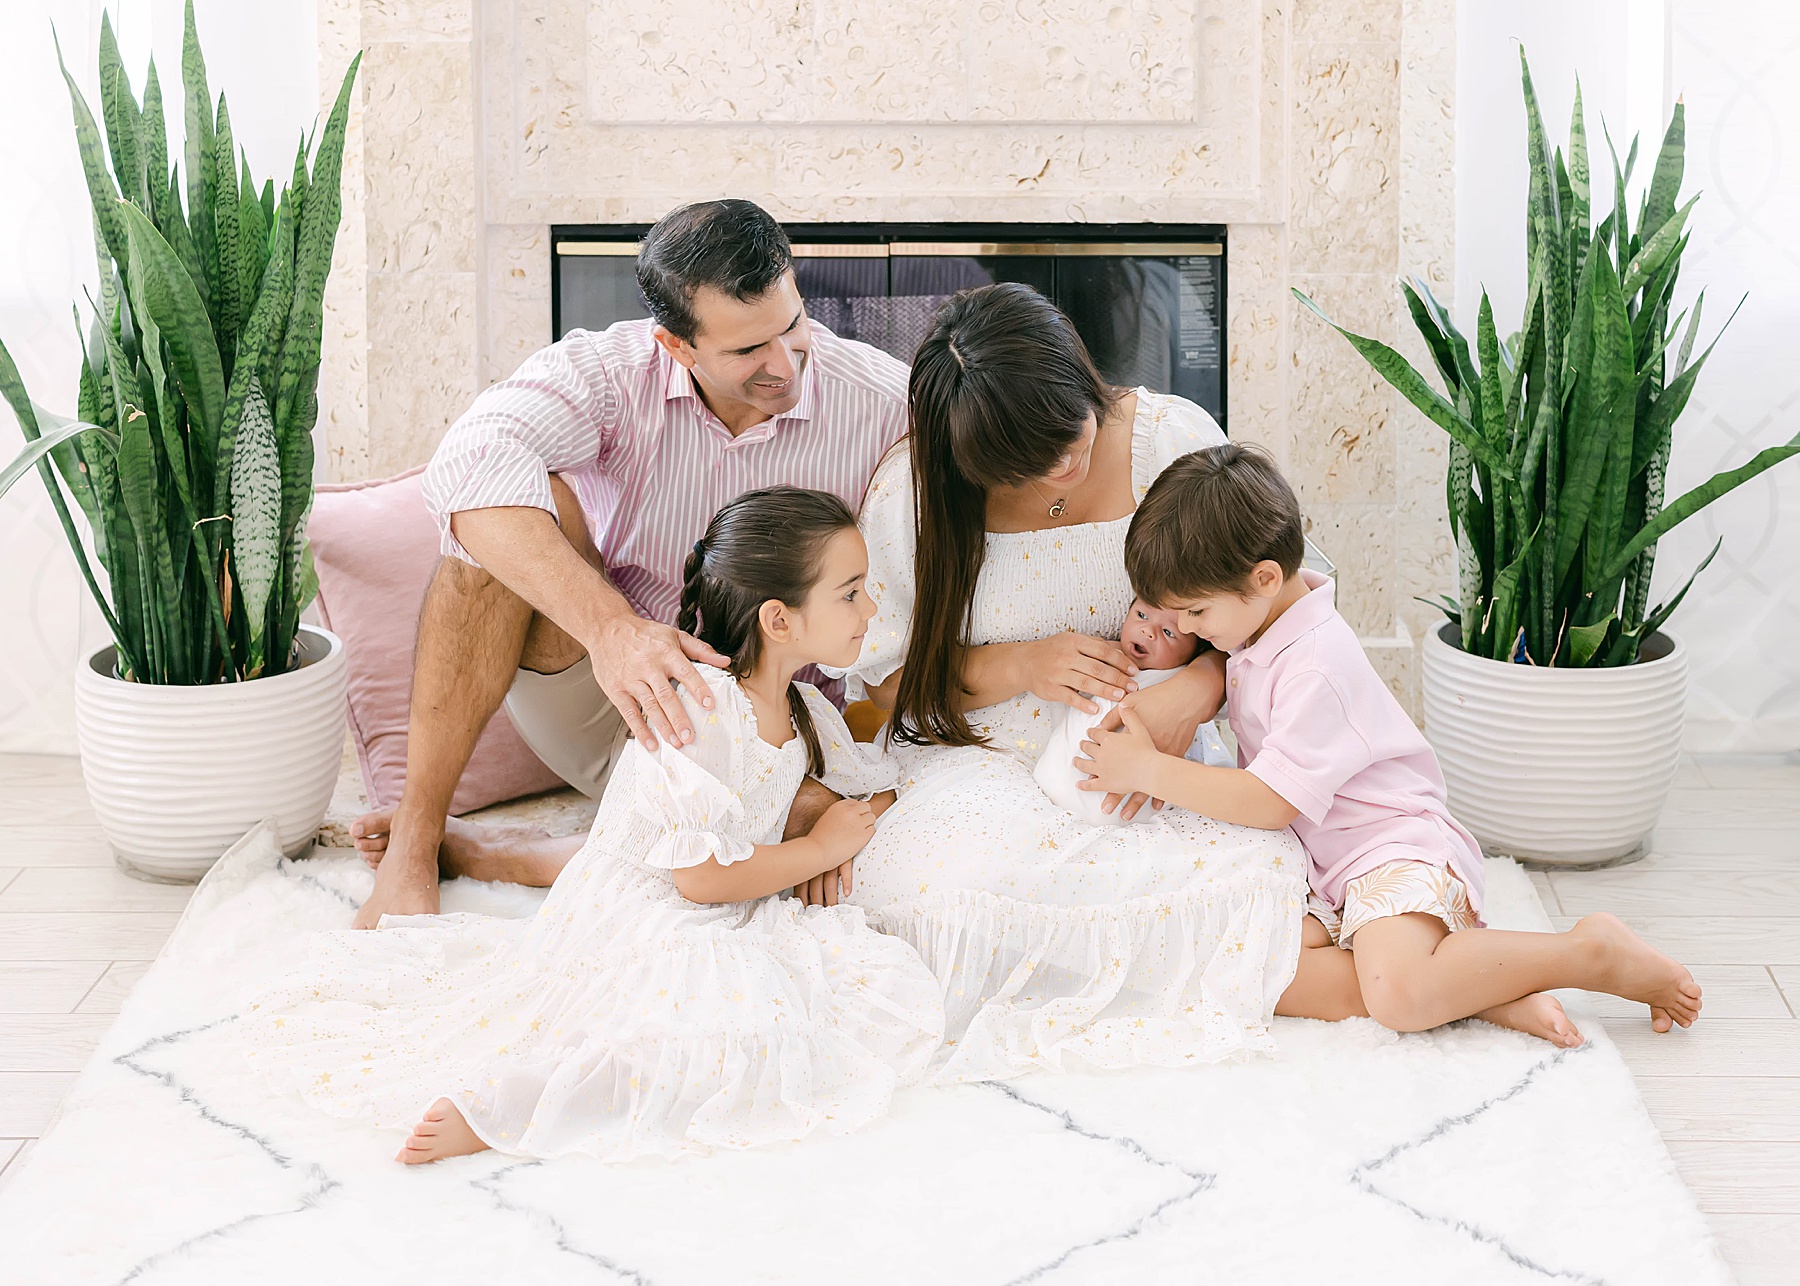 family sitting on carpet holding newborn baby wearing light colors